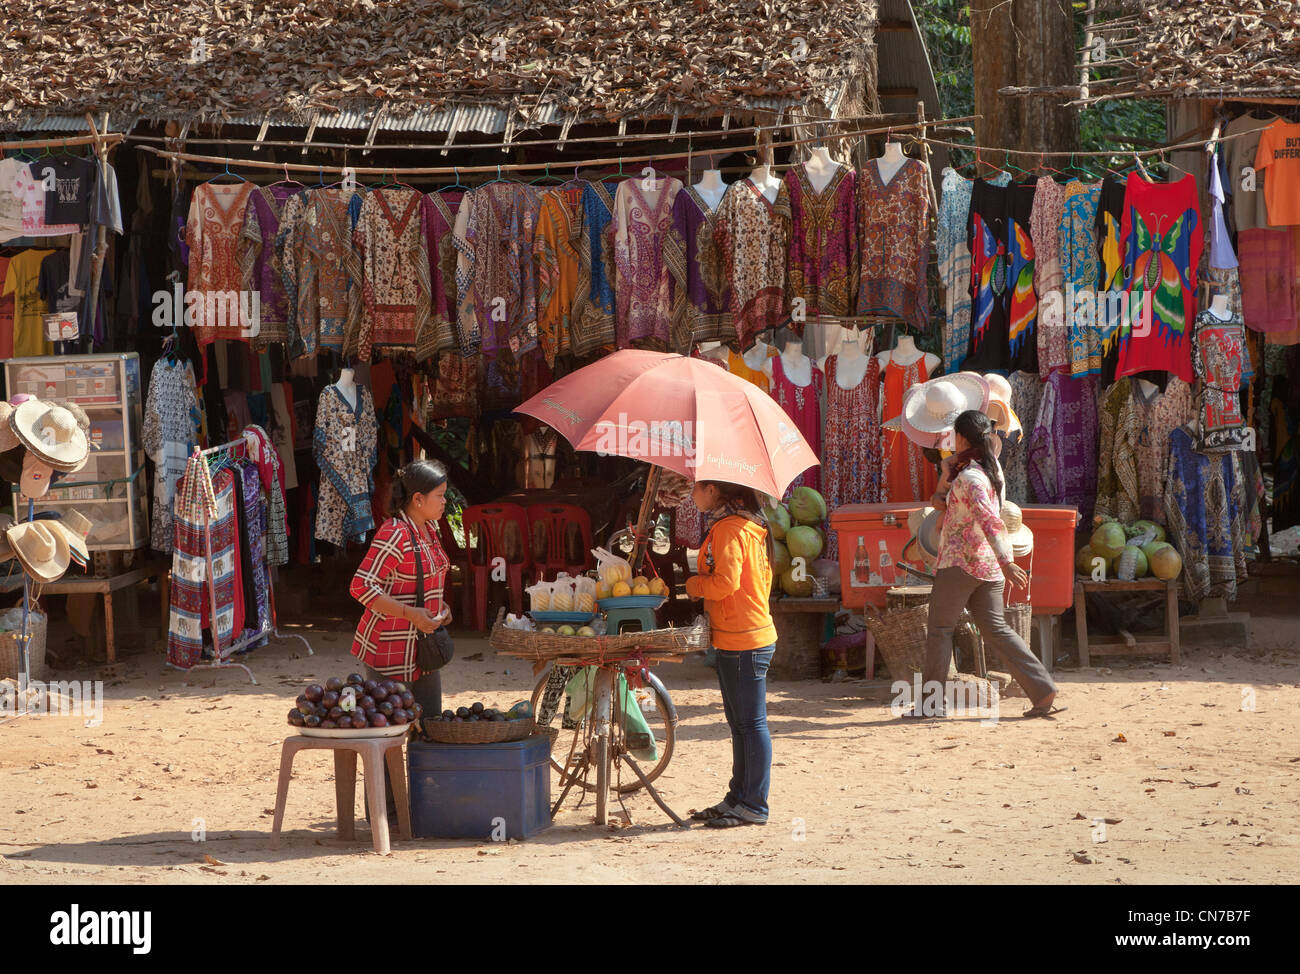 Cambodia, market stall selling clothing, fancy goods. Stock Photo